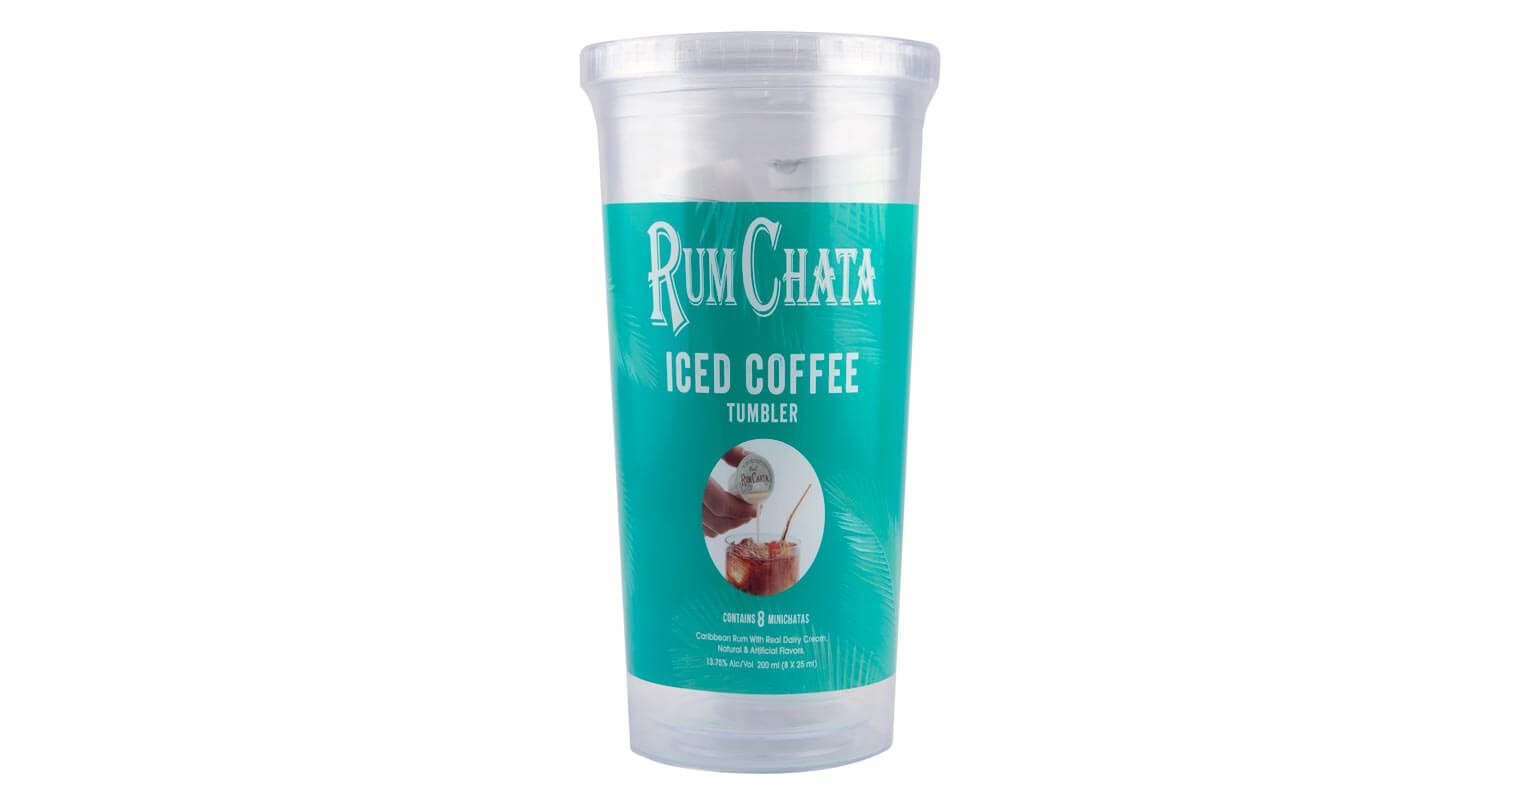 RumChata Iced Coffee Tumbler, product on white back, featured image